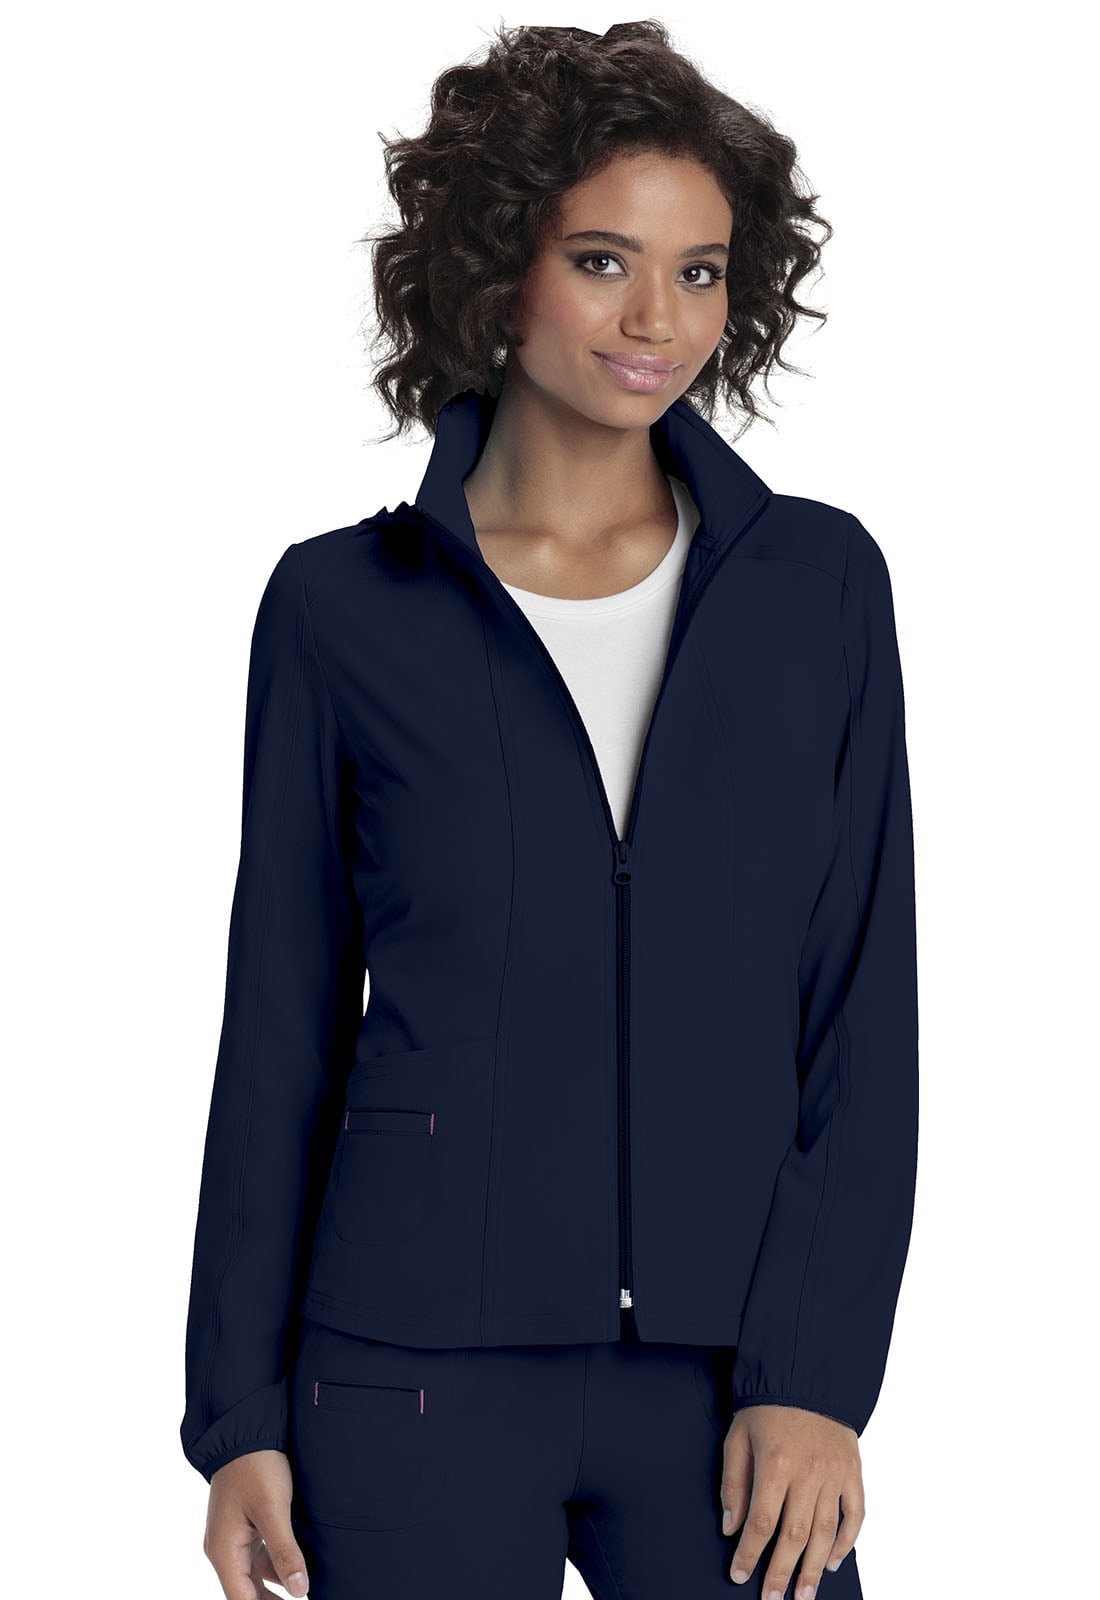 Navy Blue HeartSoul Scrubs Vest with Removable Hood HS500 NAYH 